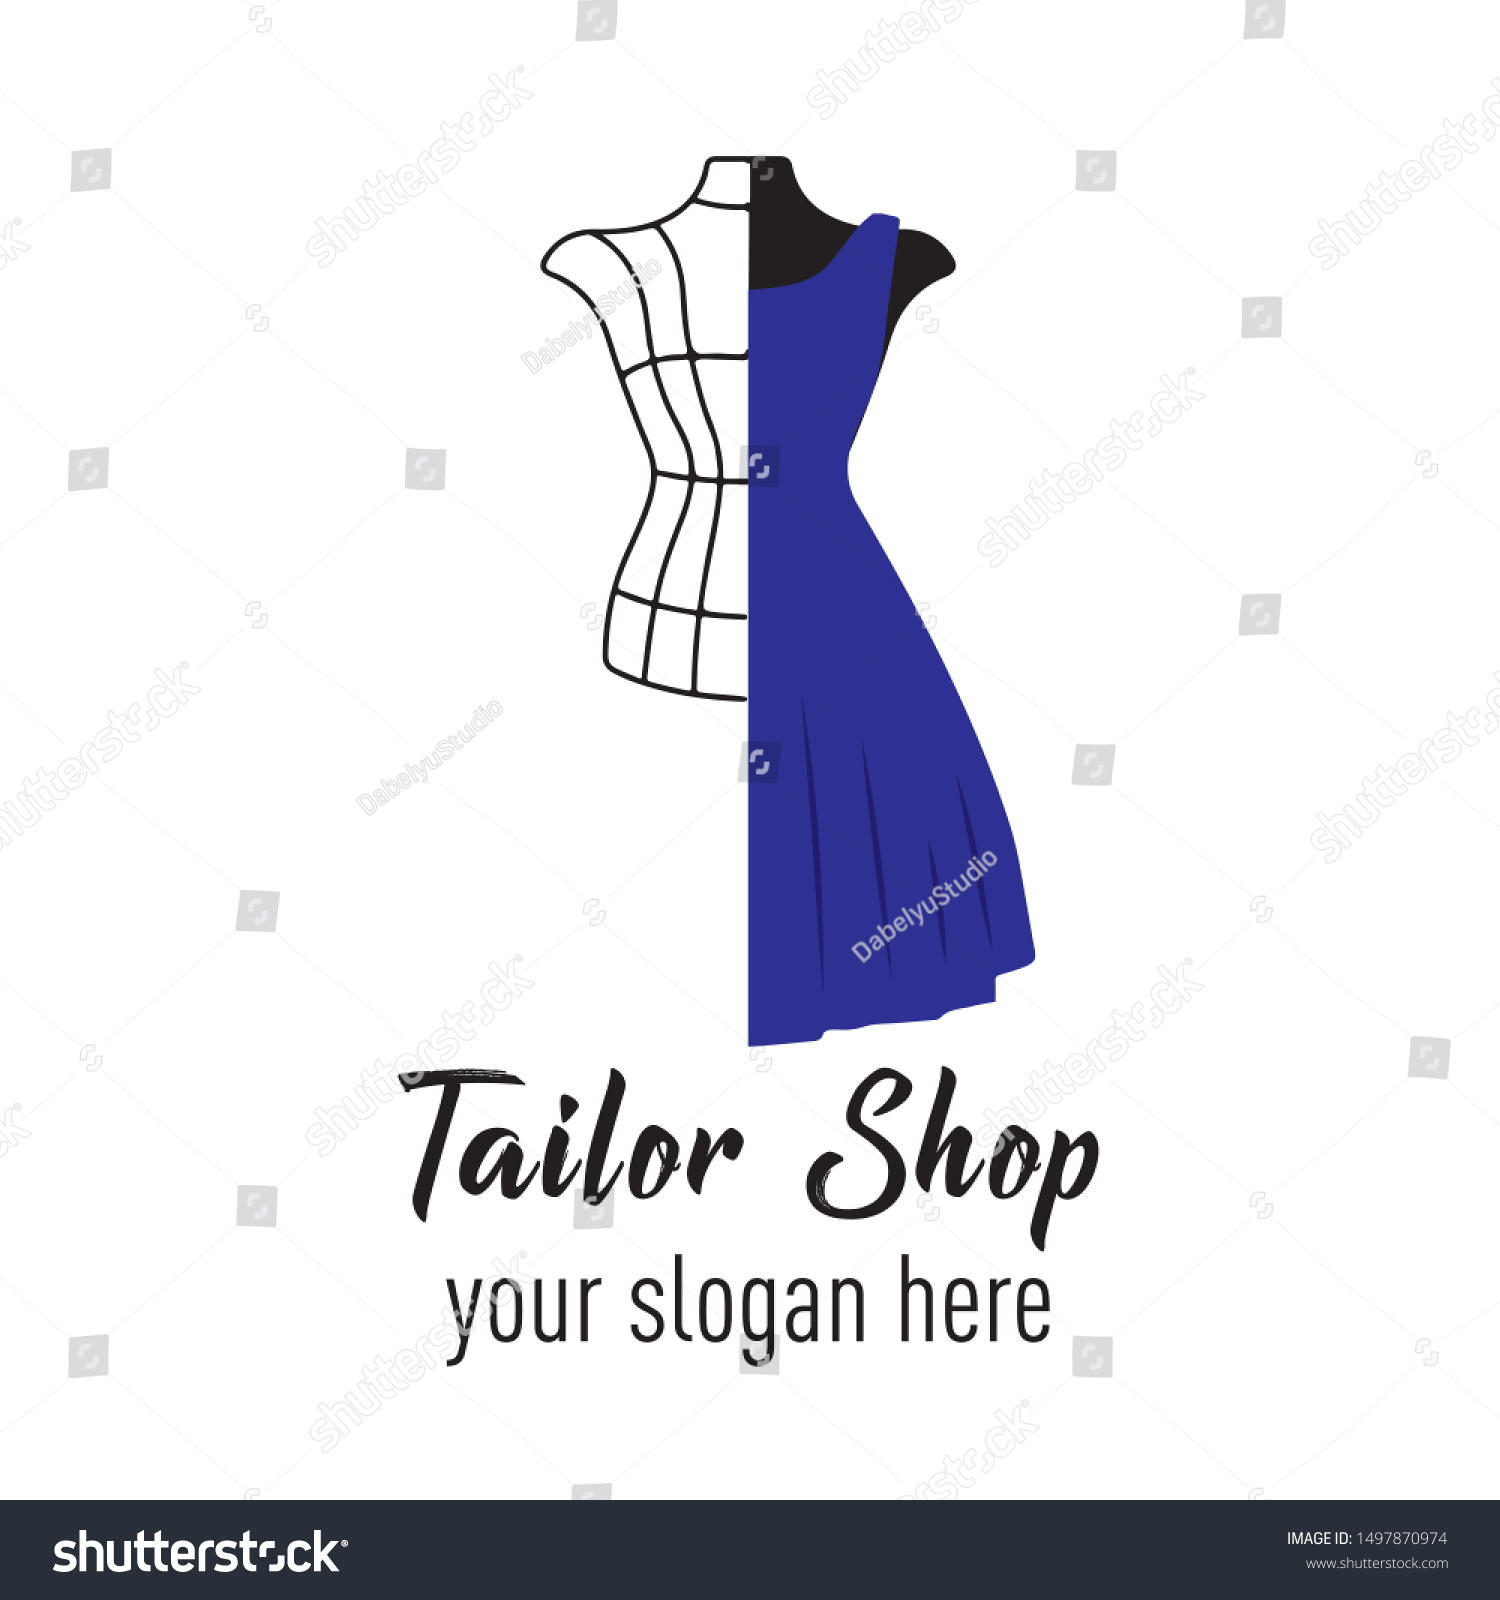 Tailor Shop Logo Blue Colored Dress Stock Vector (Royalty Free ...